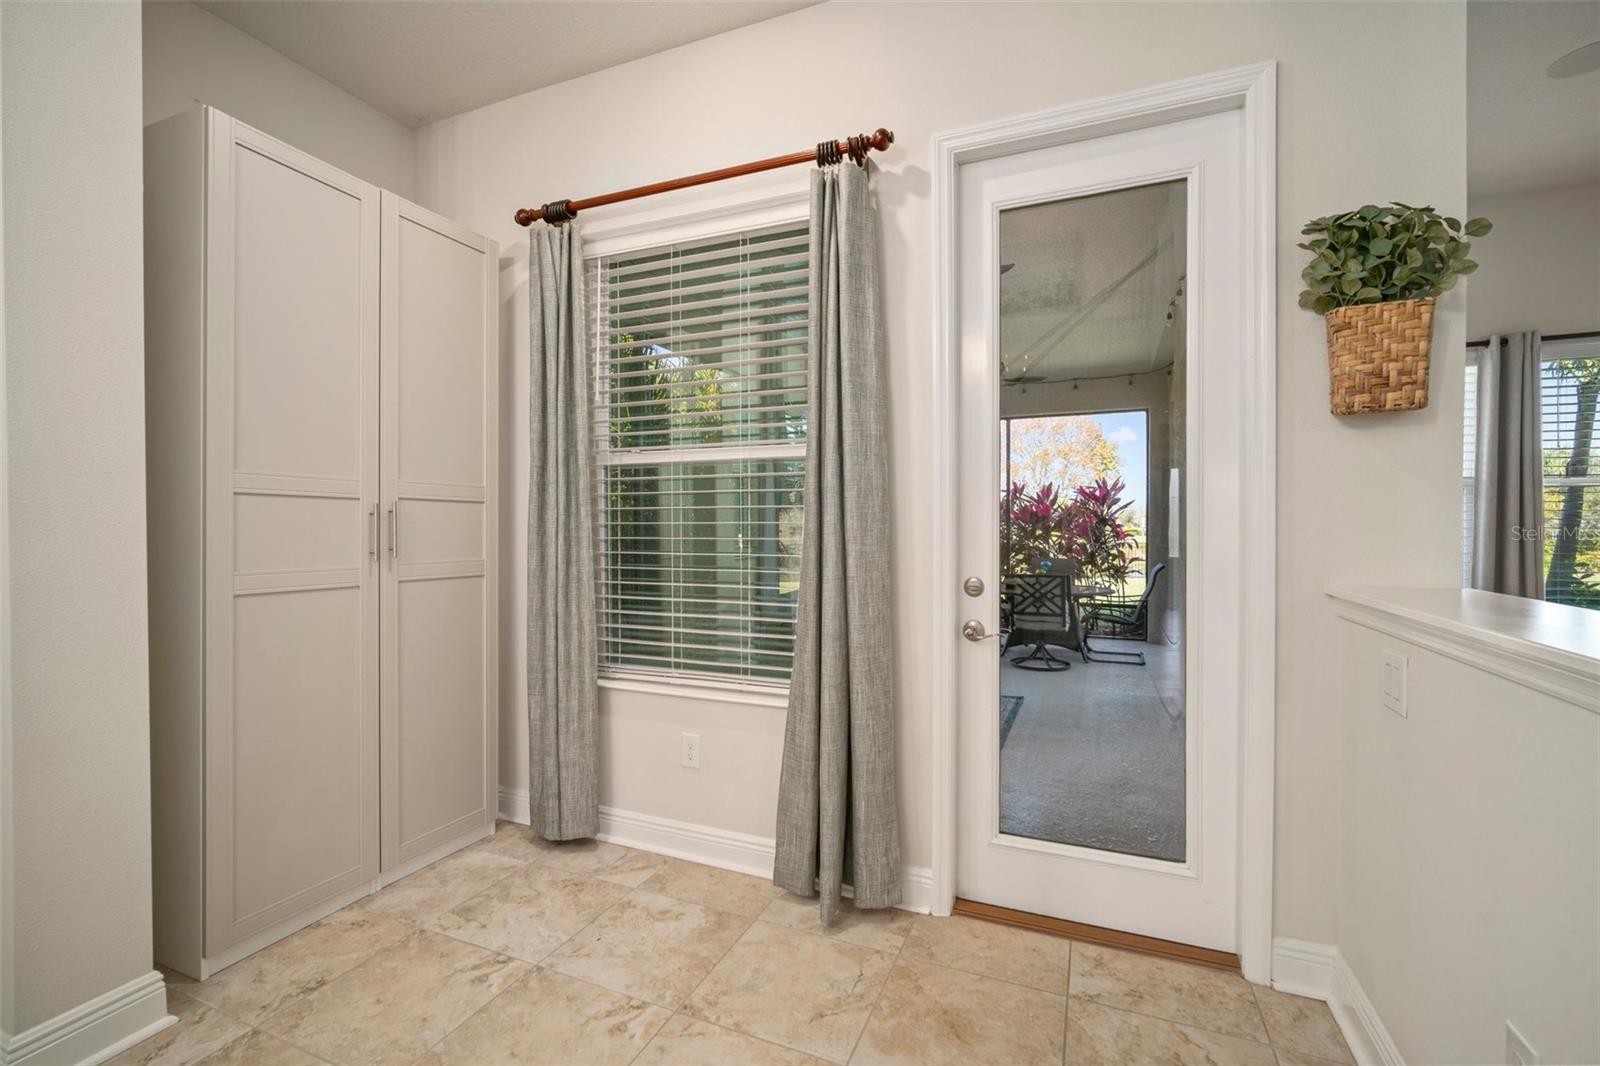 Patio door leading to covered screened lanai